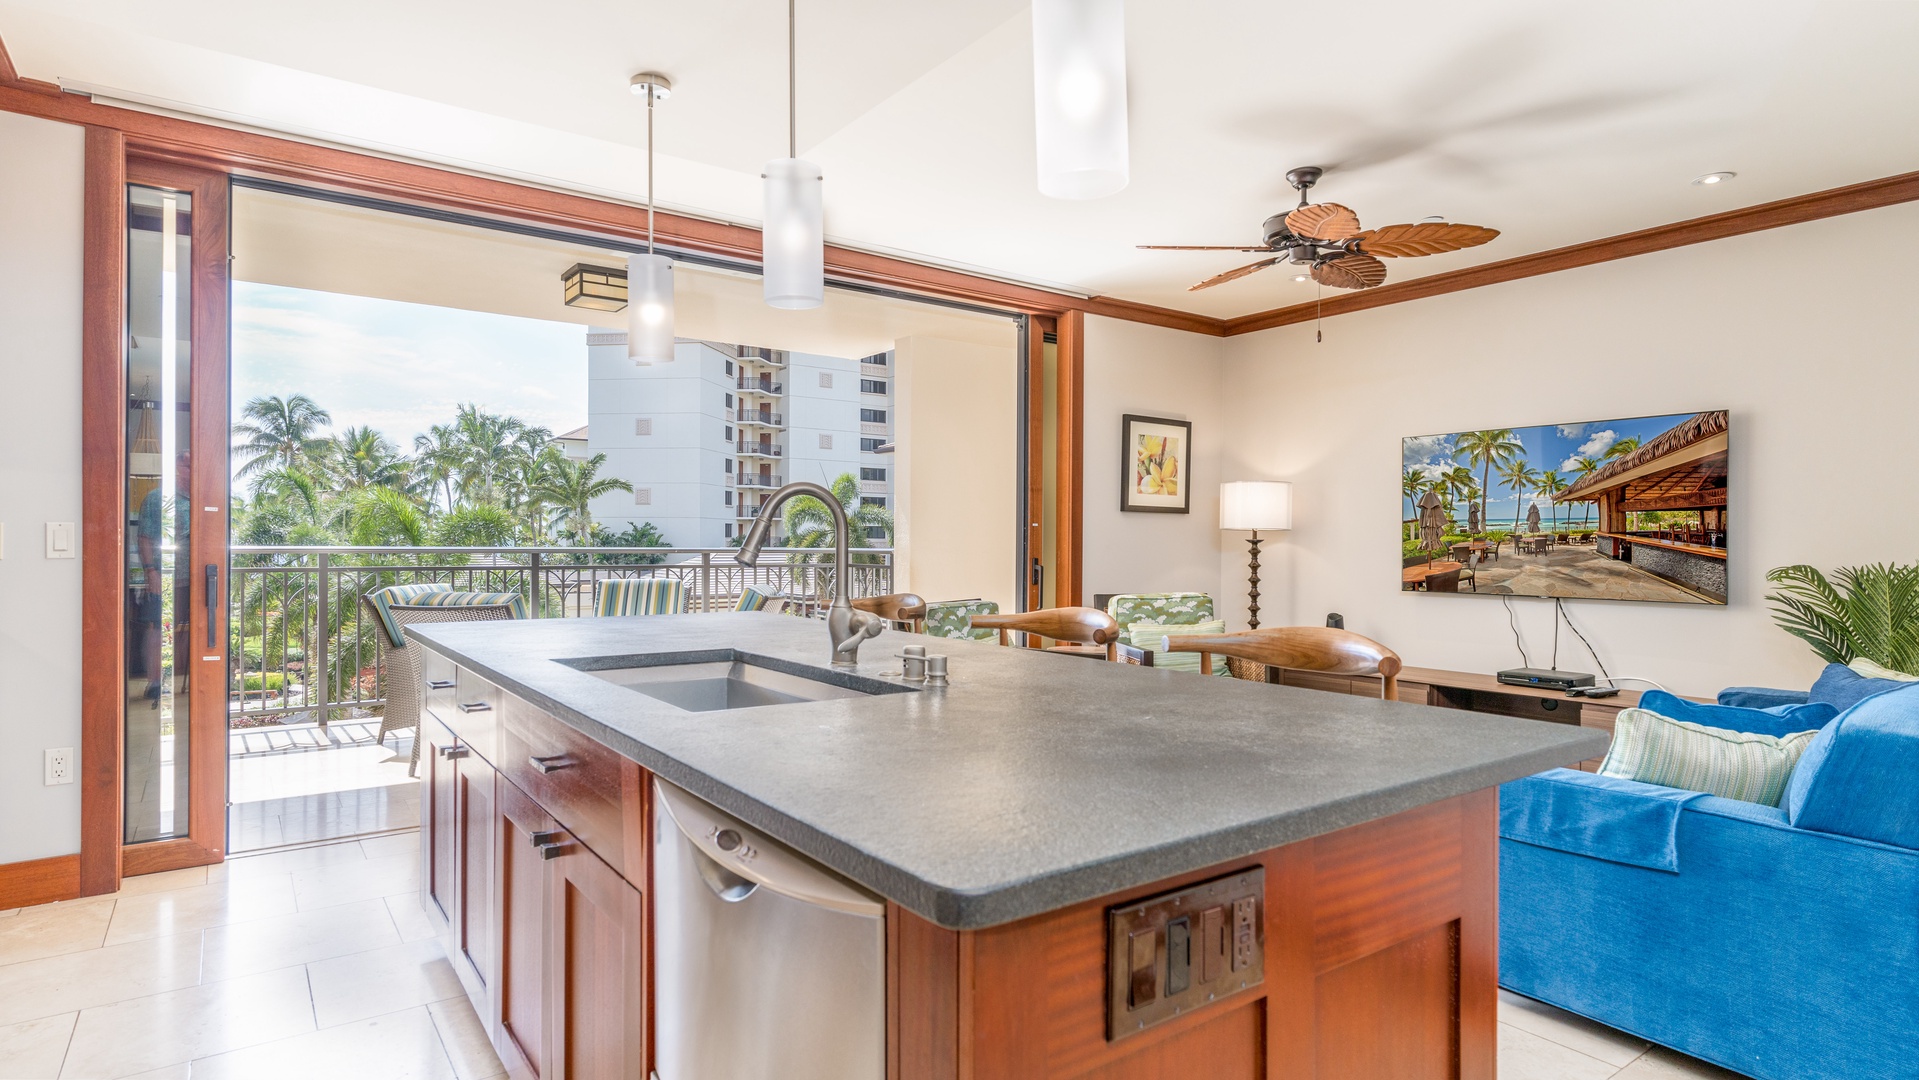 Kapolei Vacation Rentals, Ko Olina Beach Villas O305 - The best views in the house from the kitchen area.